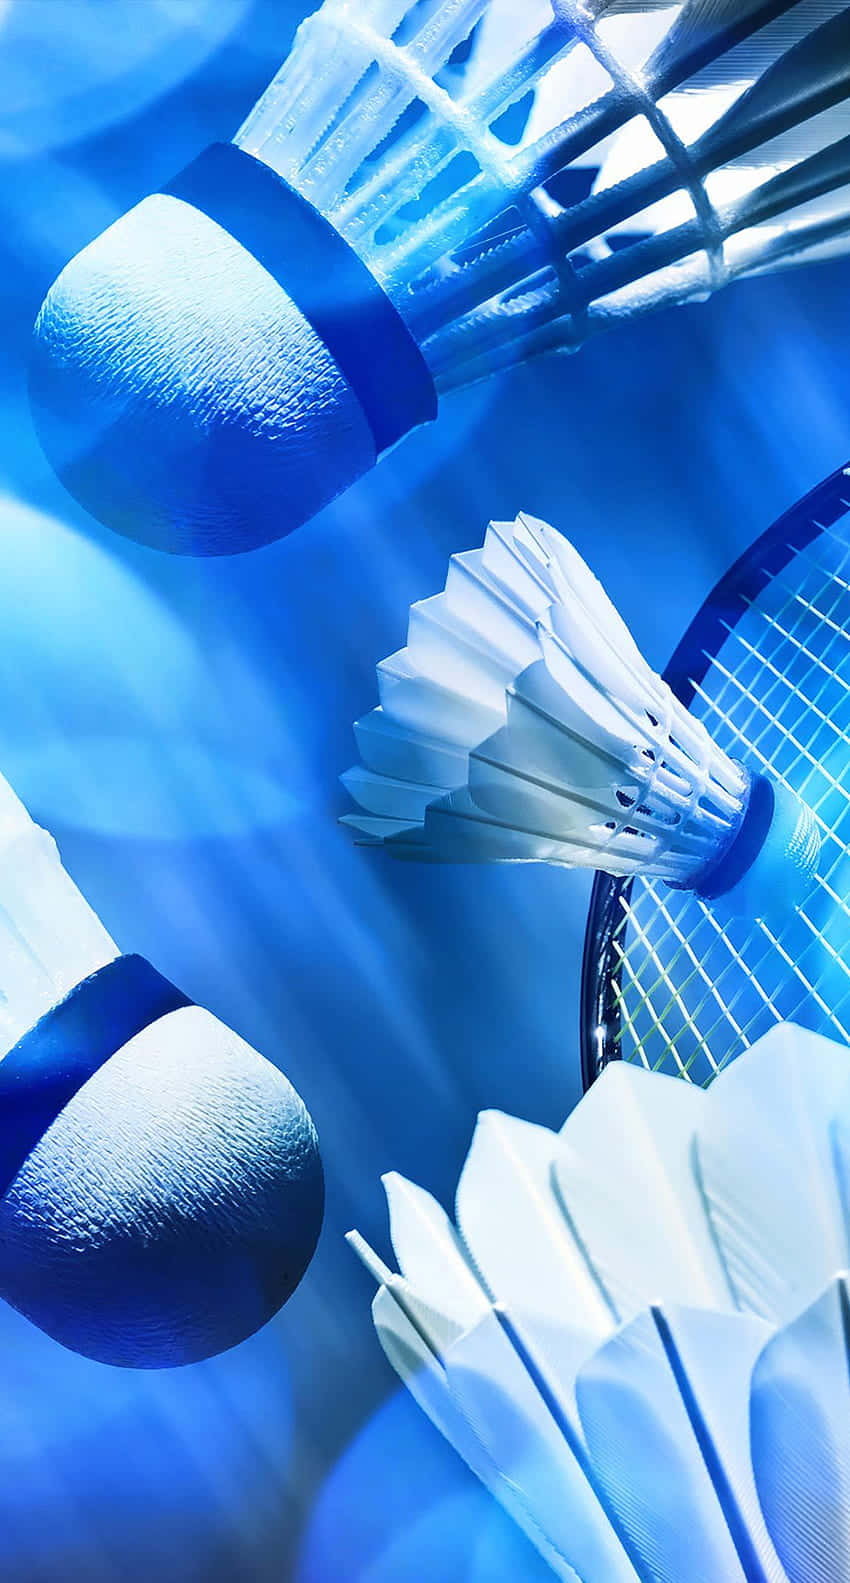 Badminton Rackets And Shuttlecocks On A Blue Background